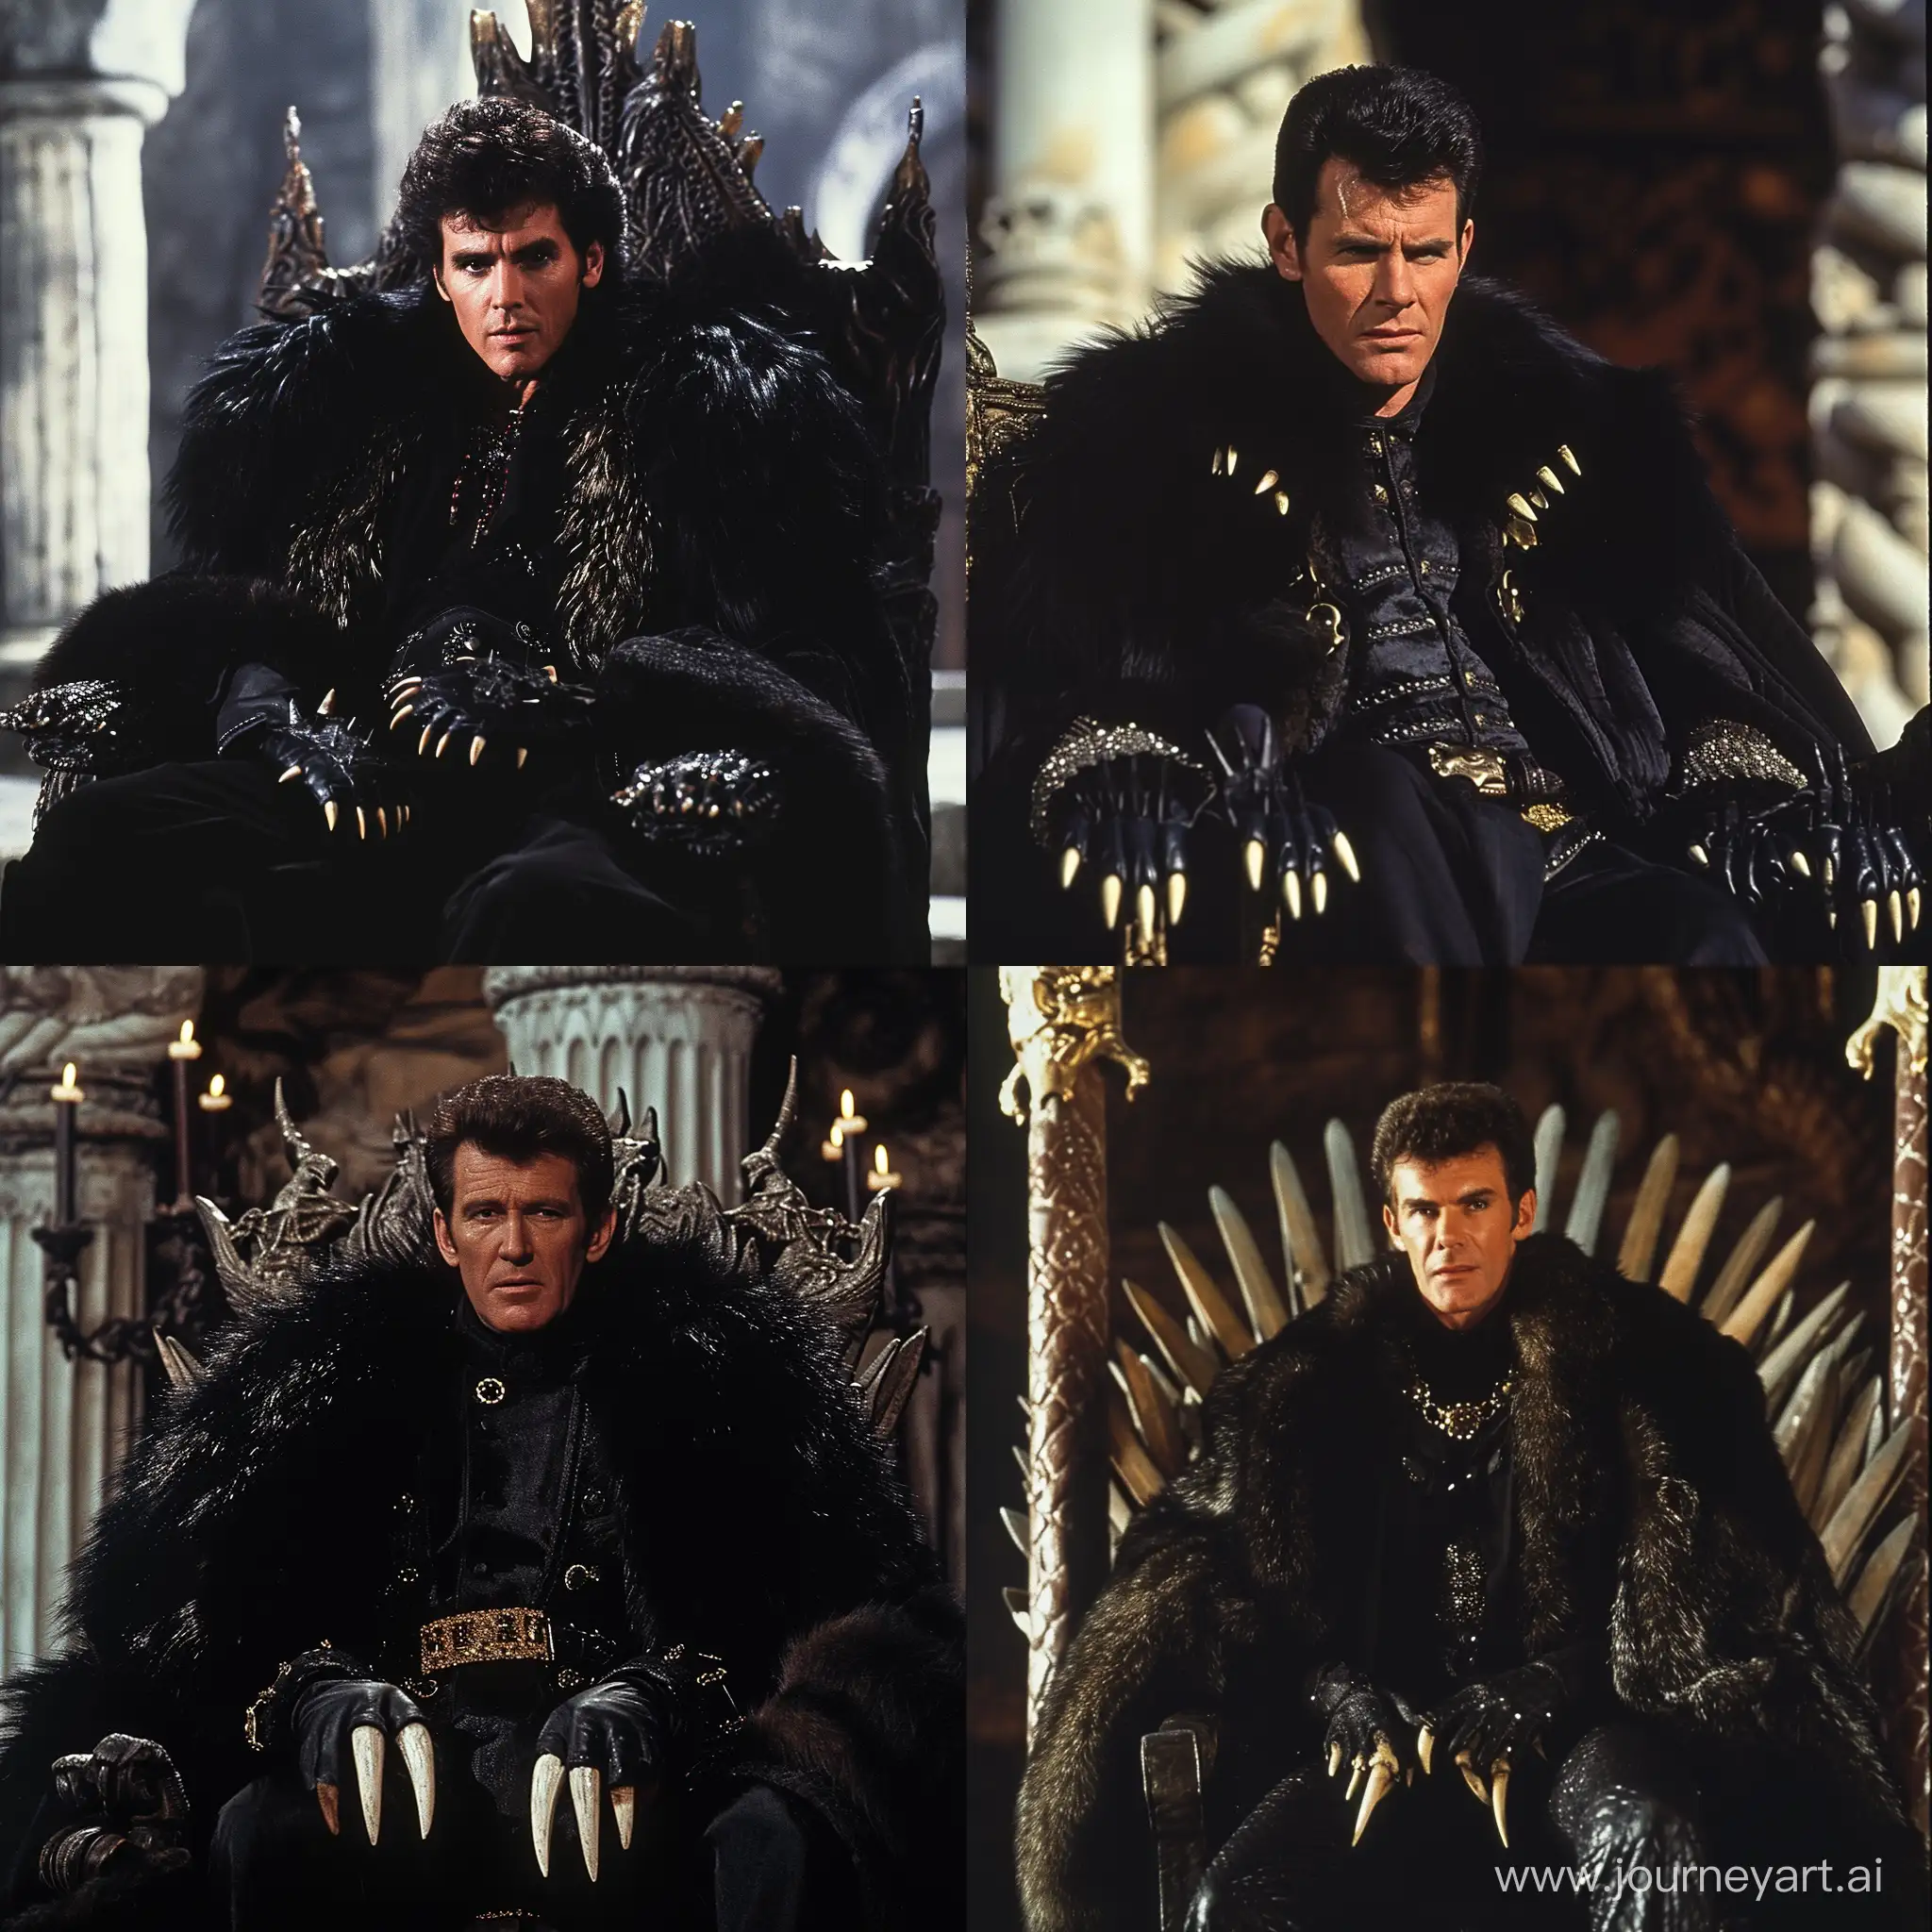 Simon-Cowell-in-80s-Fantasy-Movie-with-Canines-and-Throne